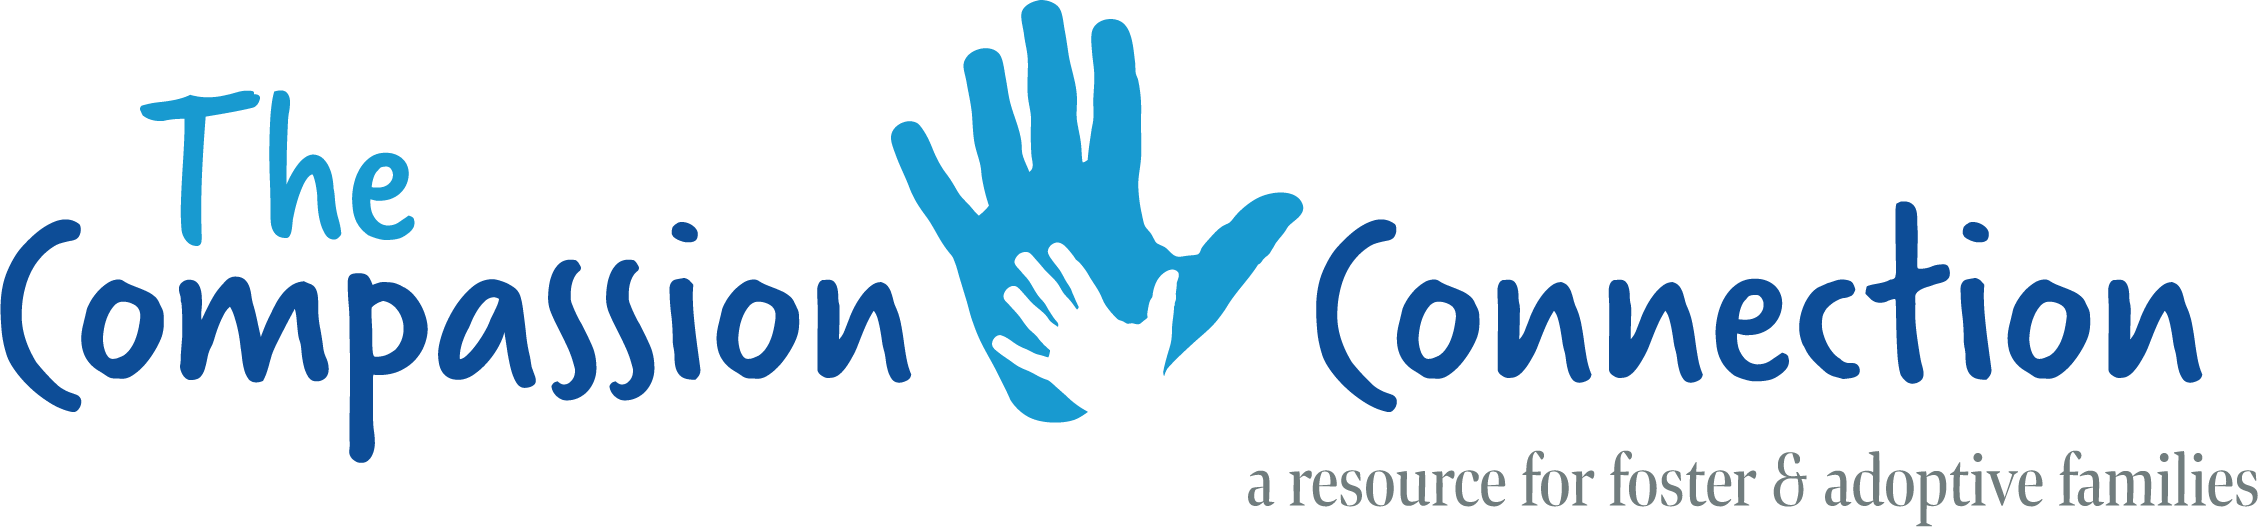 The Compassion Connection logo